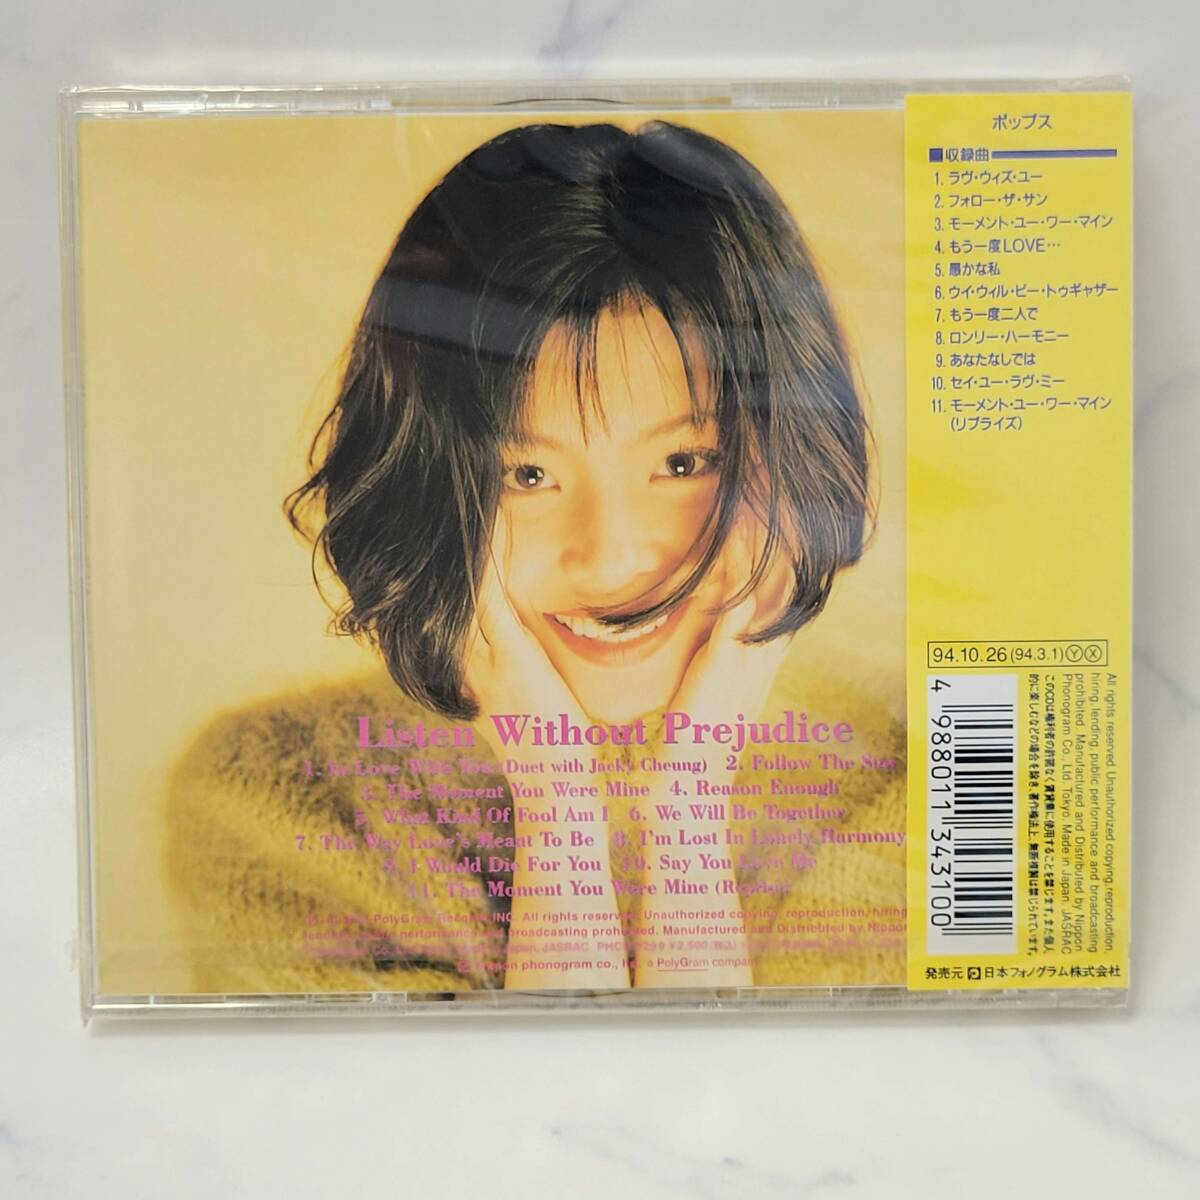 Regine / In Love With You / CD lre Gene /lavu* with * You l Asian pop 